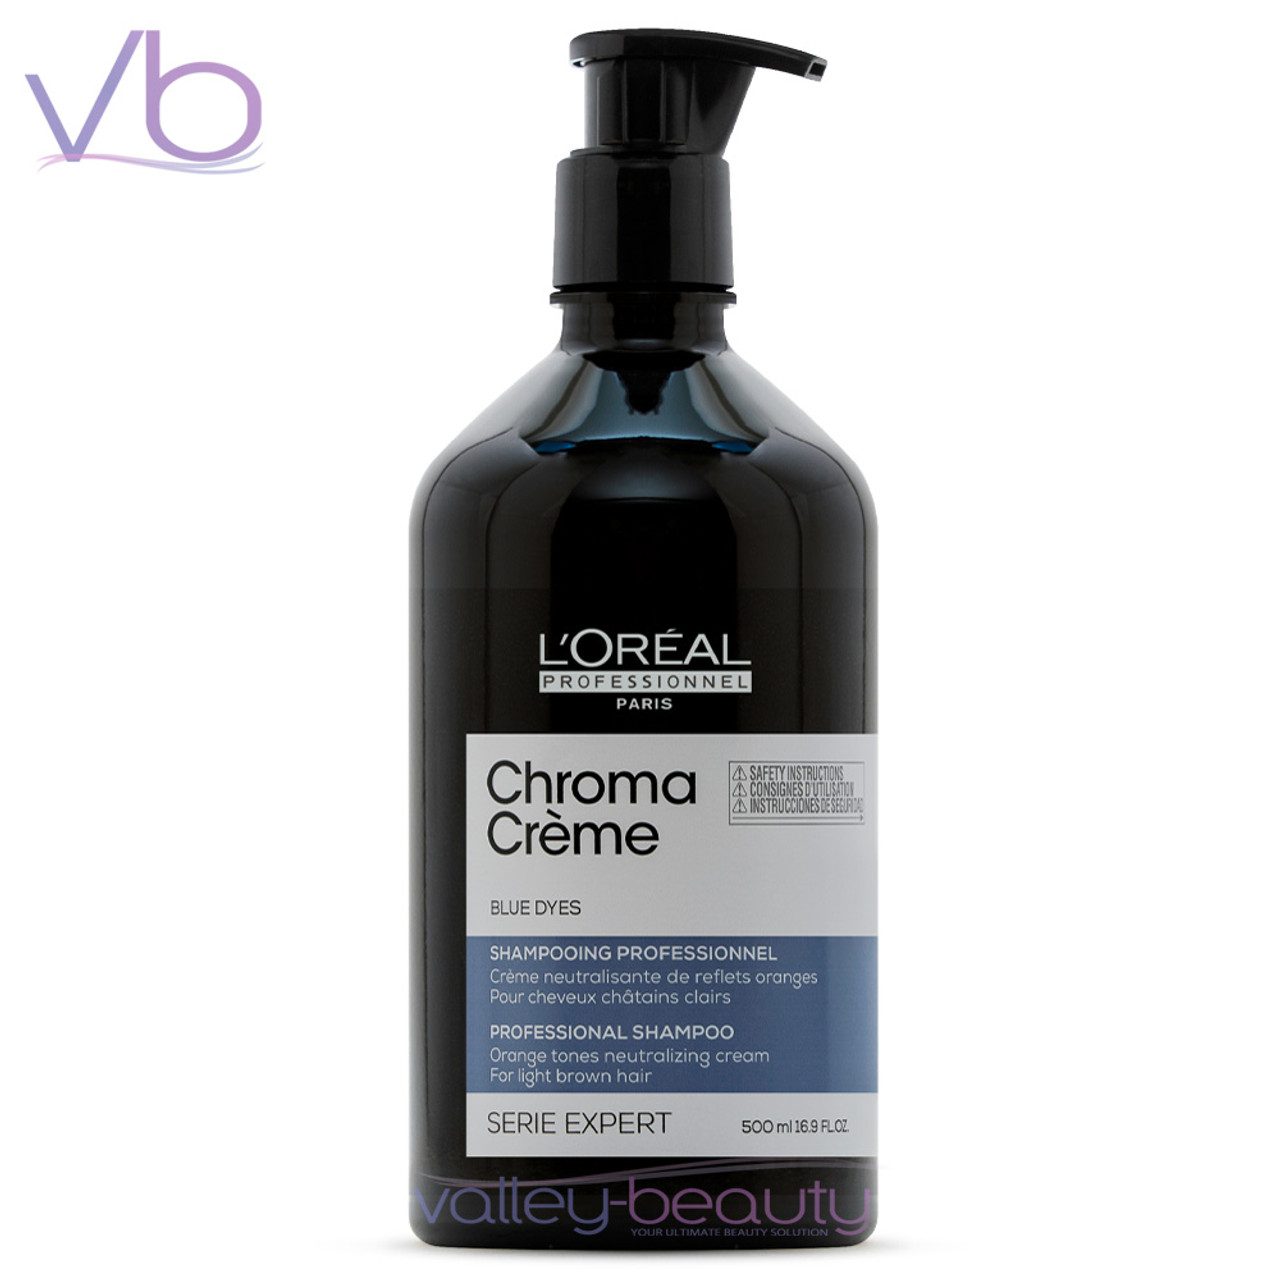 L'Oreal L’Oreal Professionnel Chroma Creme Blue Dyes Shampoo | Orange Tones Neutralizing Cleanser for Light Brown Hair, 500ml